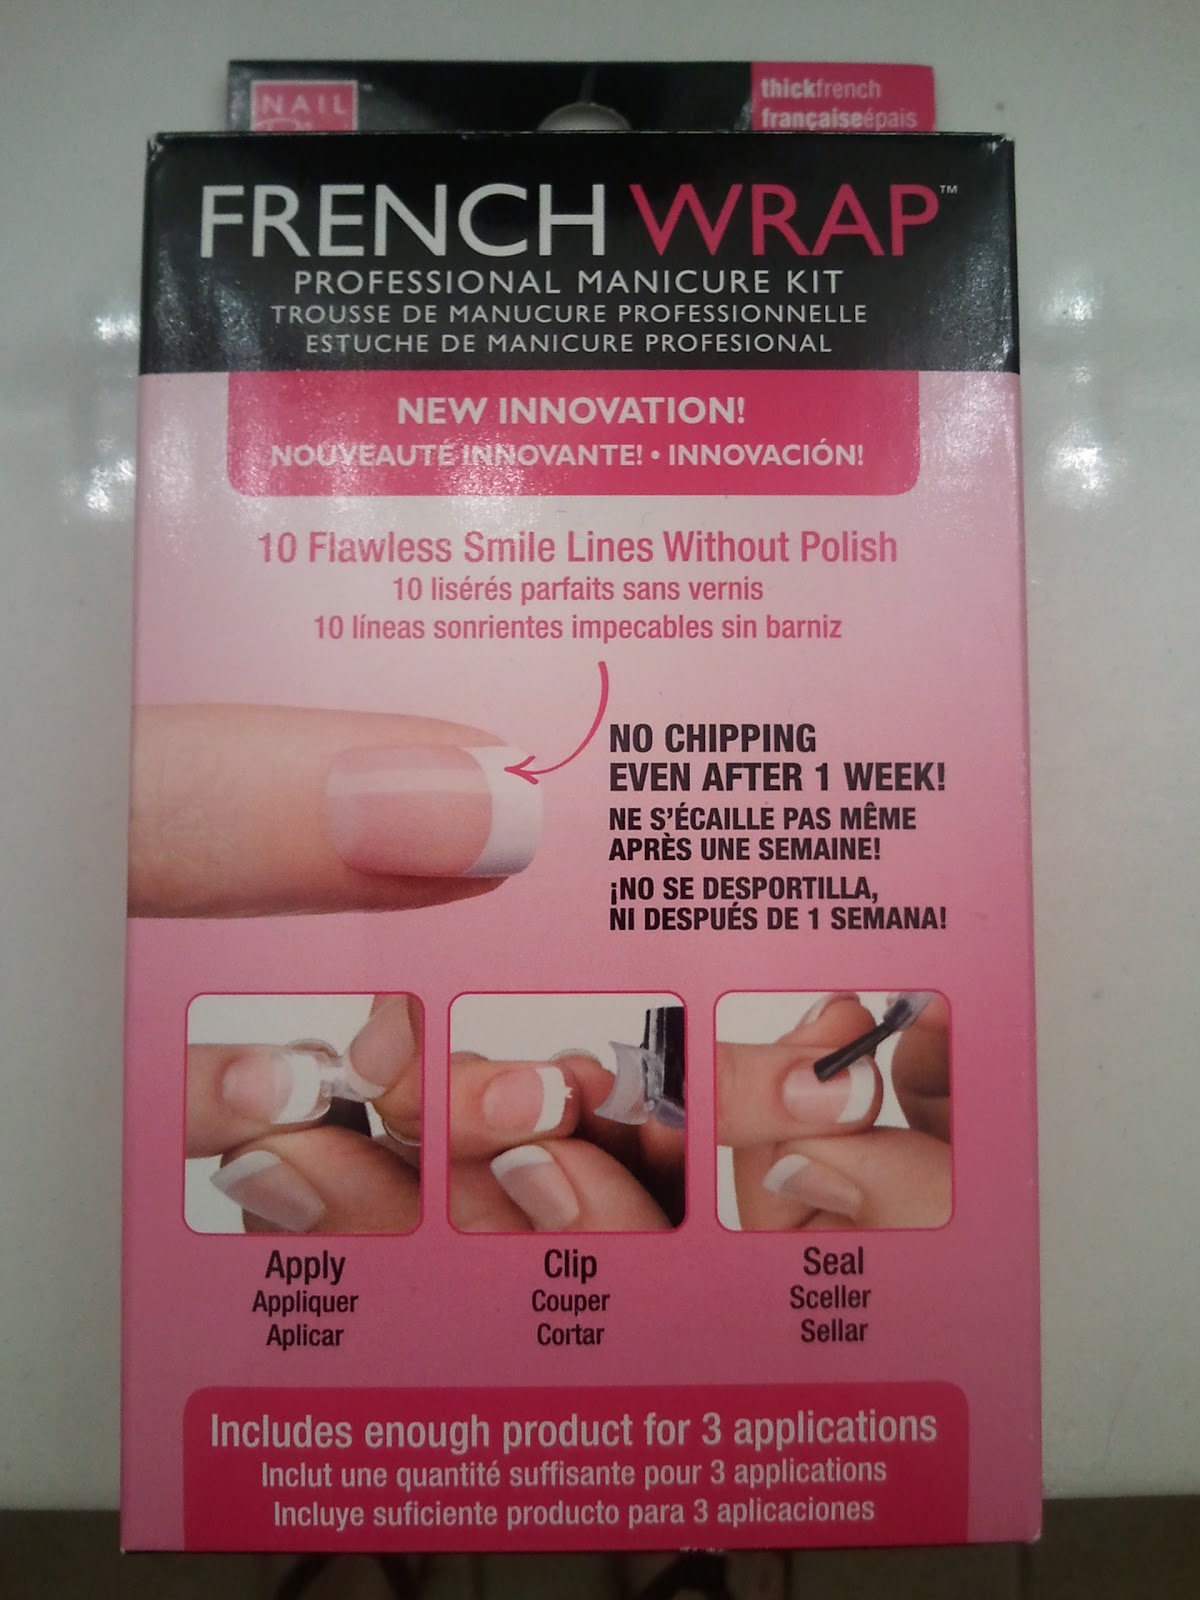 Nail Bliss Pro called the French Wrap and thought I would give it a try